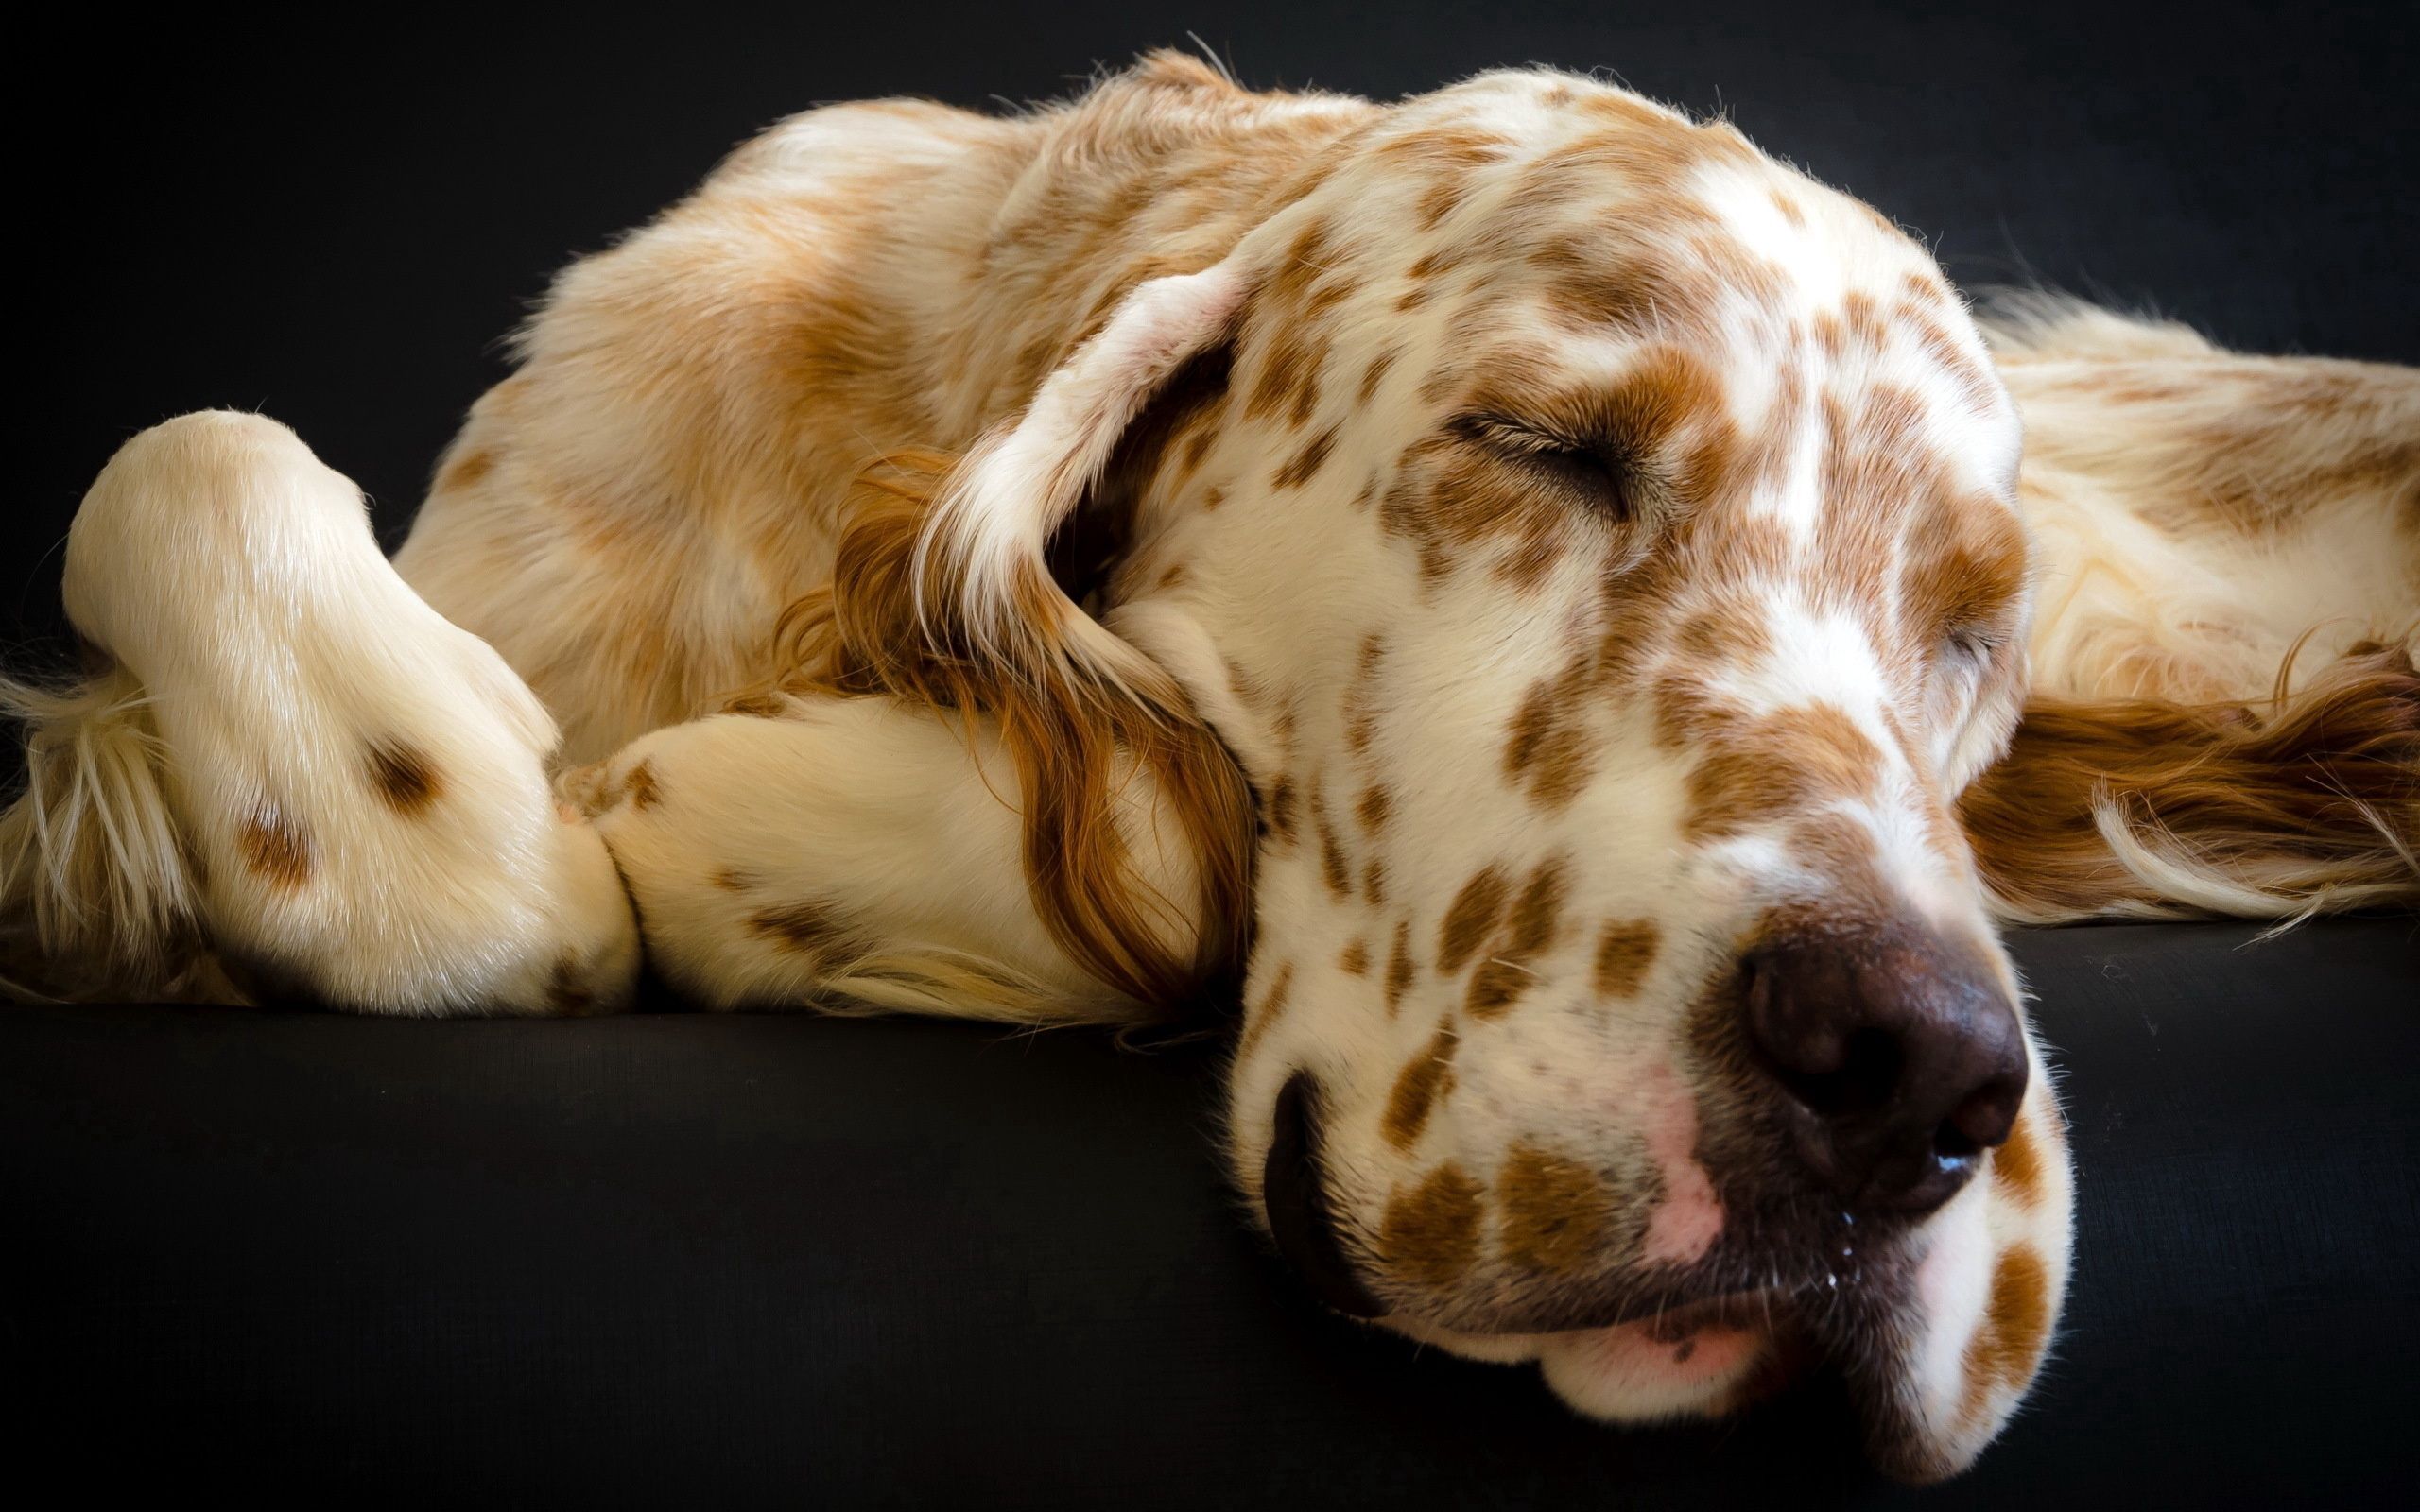 animals, dog, muzzle, spotted, spotty, sleep, dream High Definition image